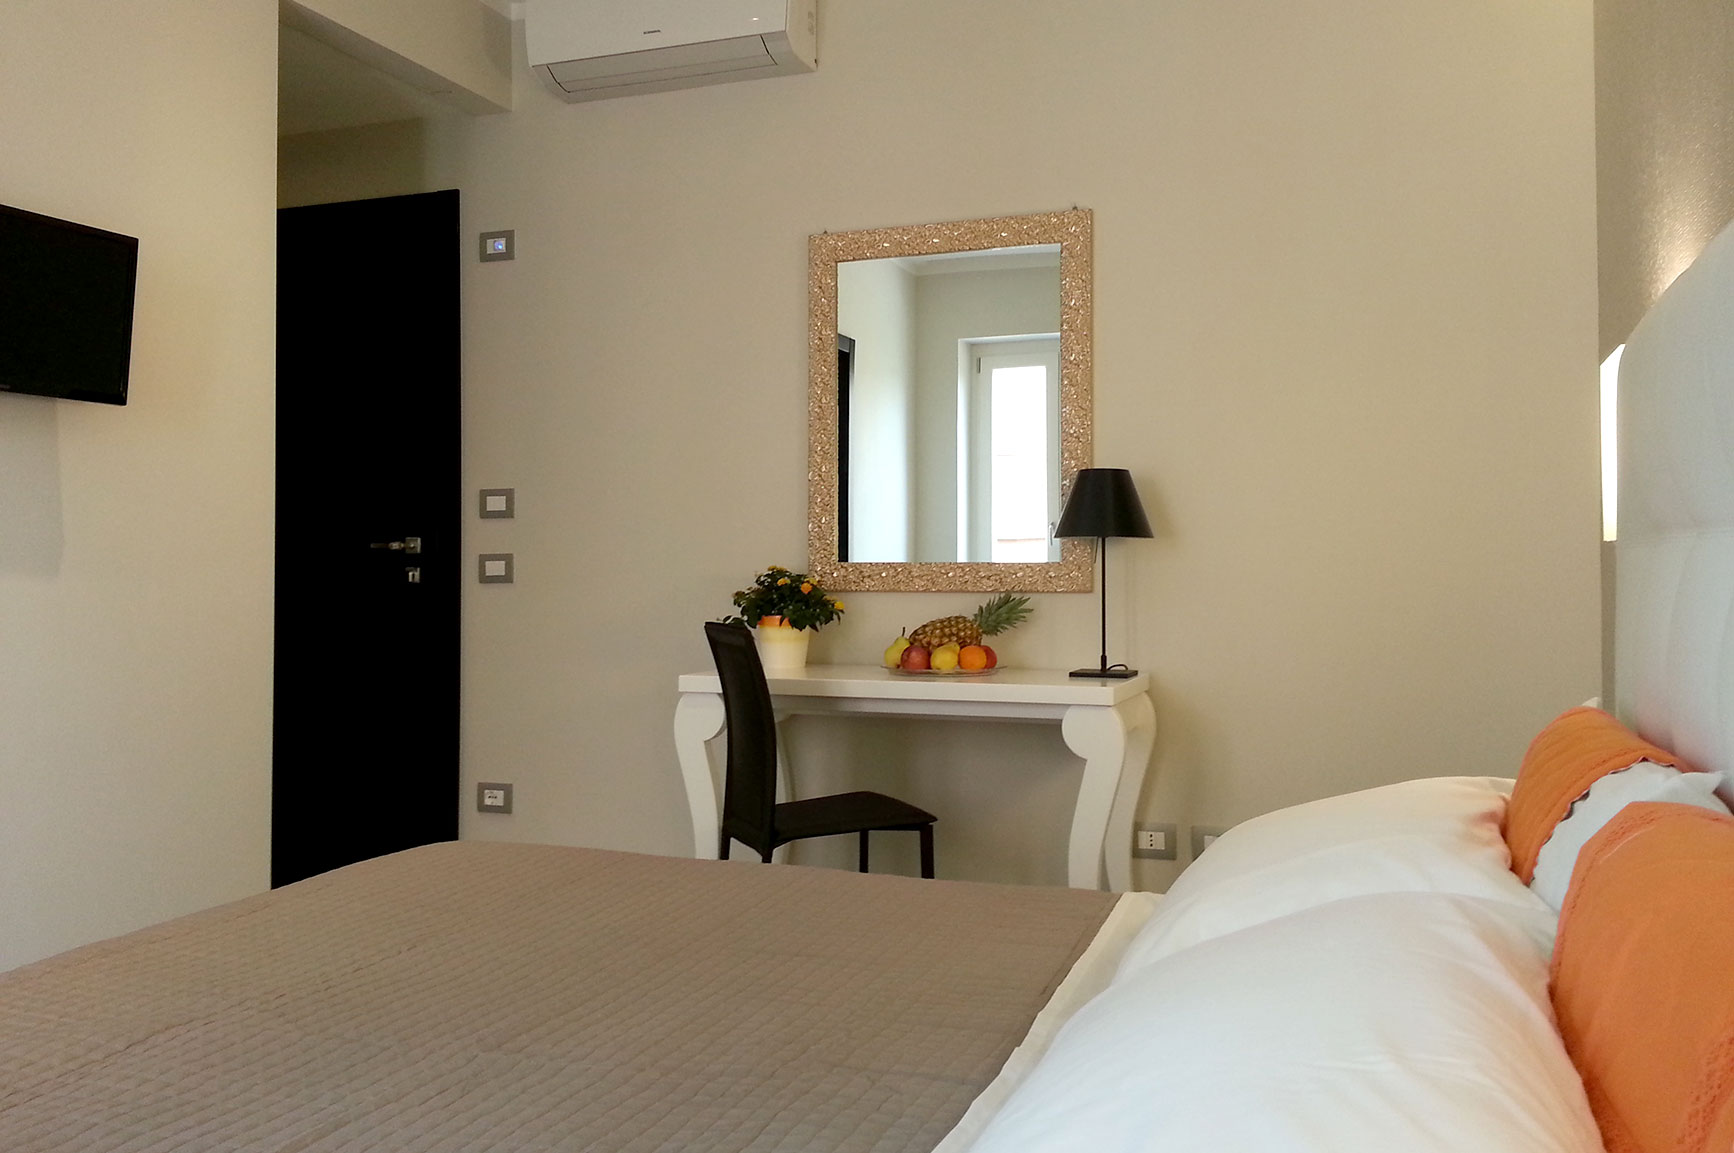 Bed and Breakfast Gemini suite roma